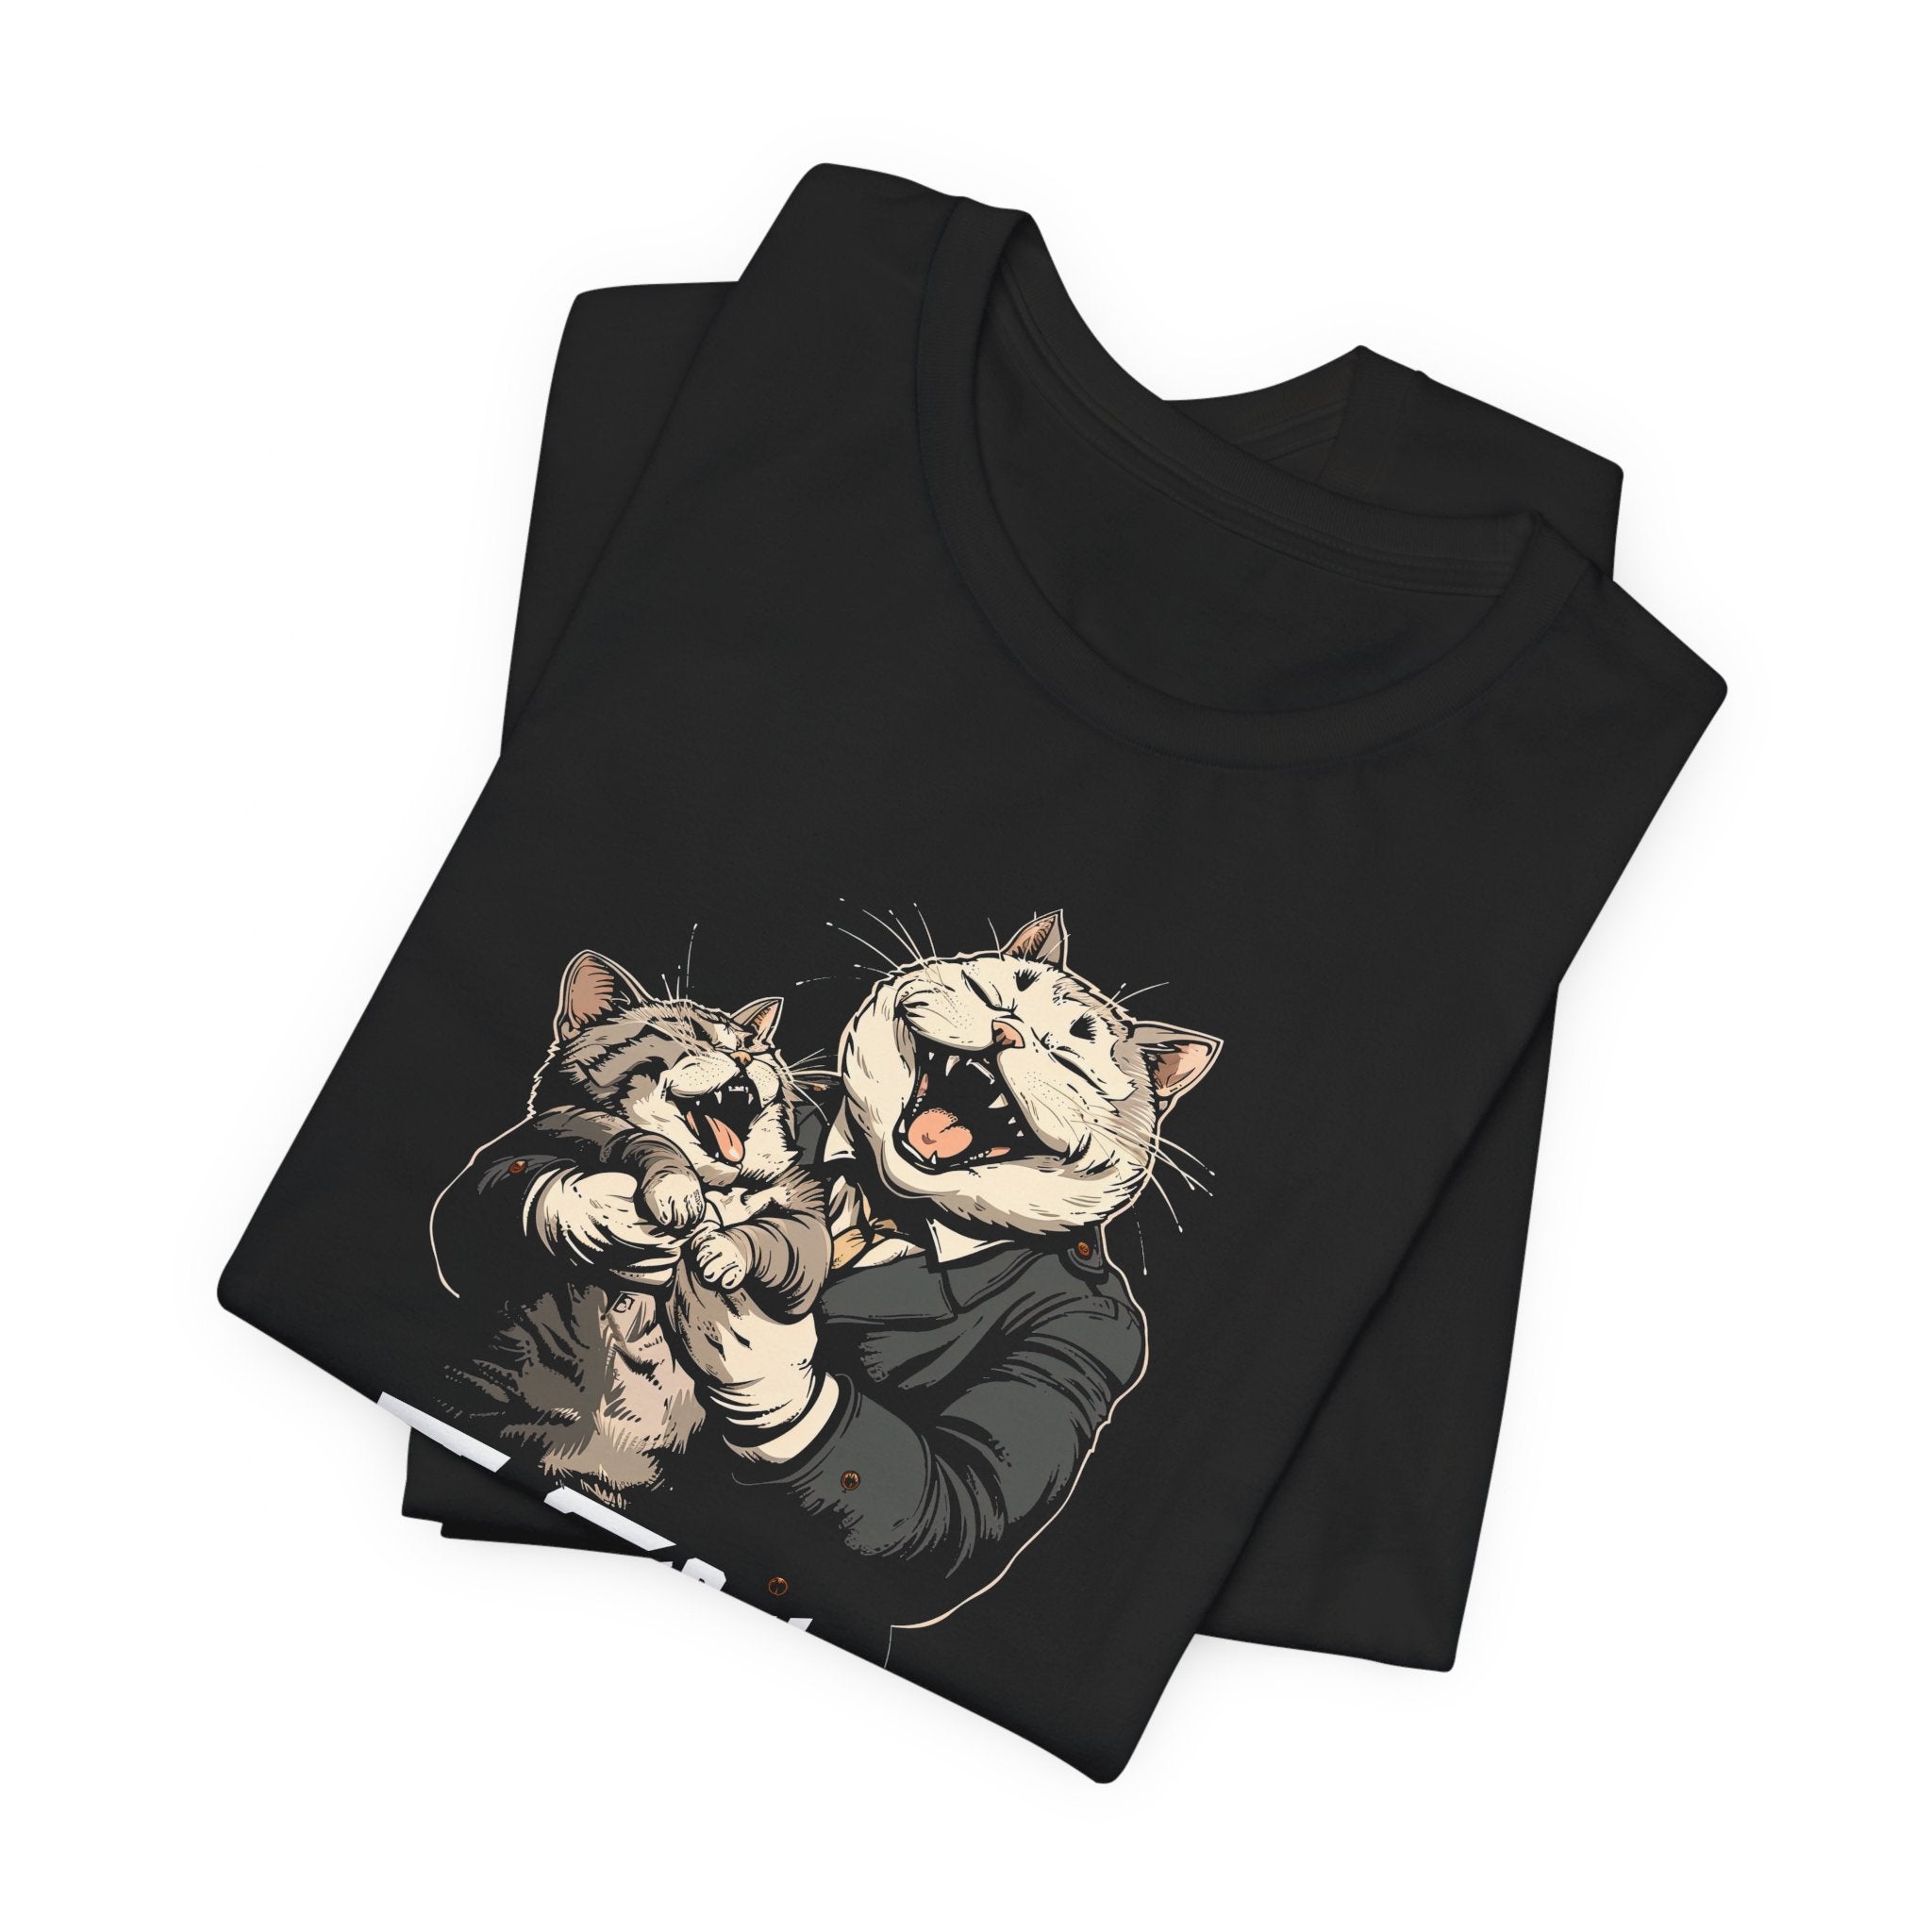 The Catfather Funny Cat Lover Shirt